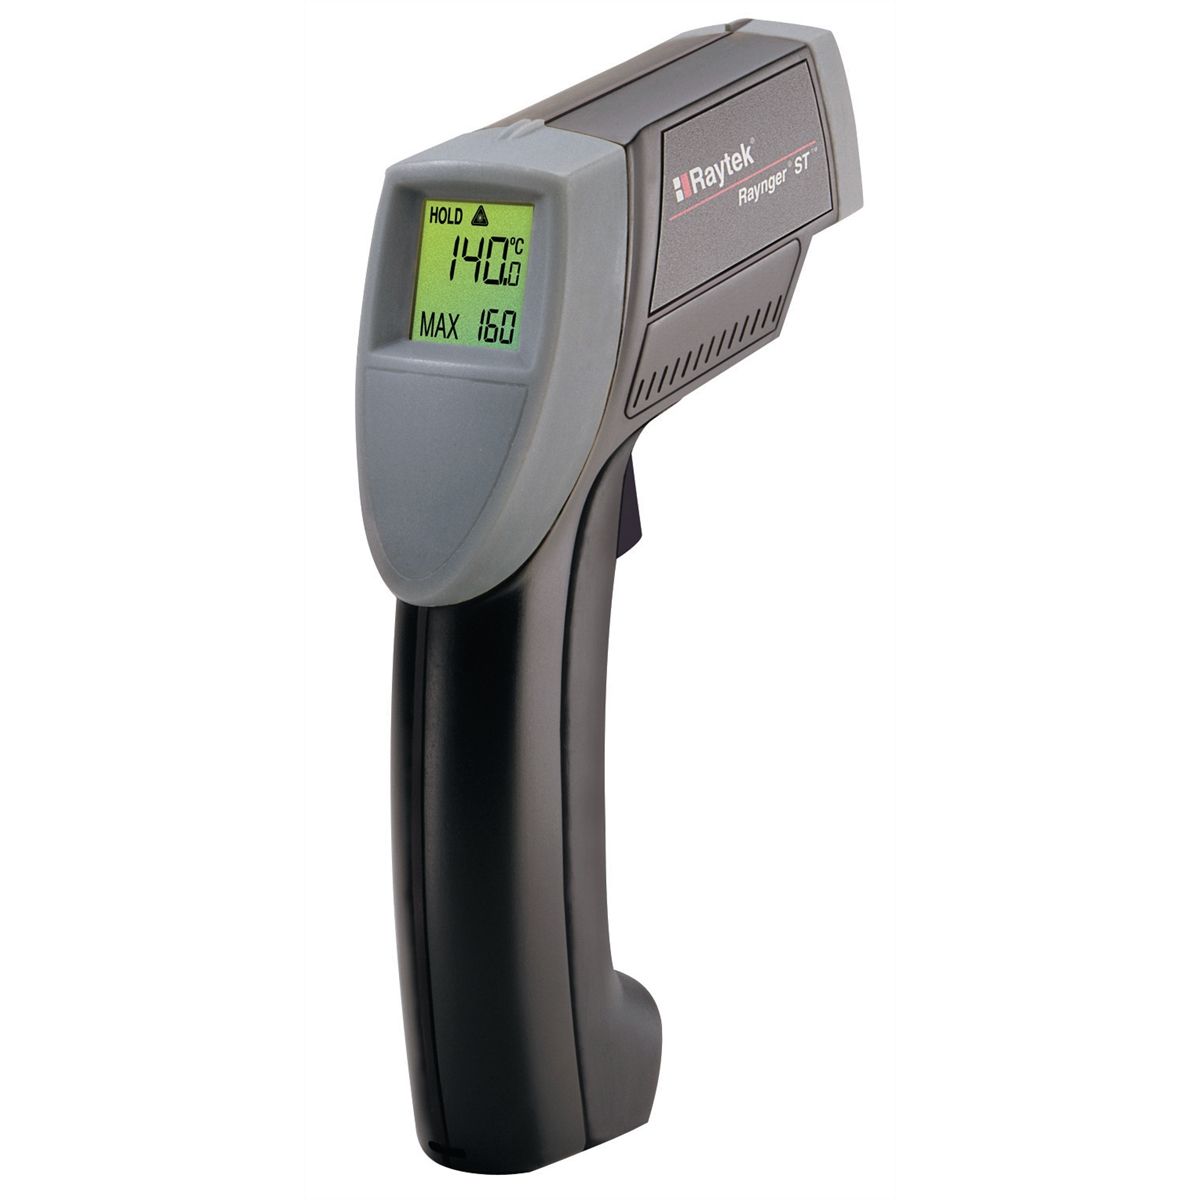 Lake & Trail Infrared Thermometer